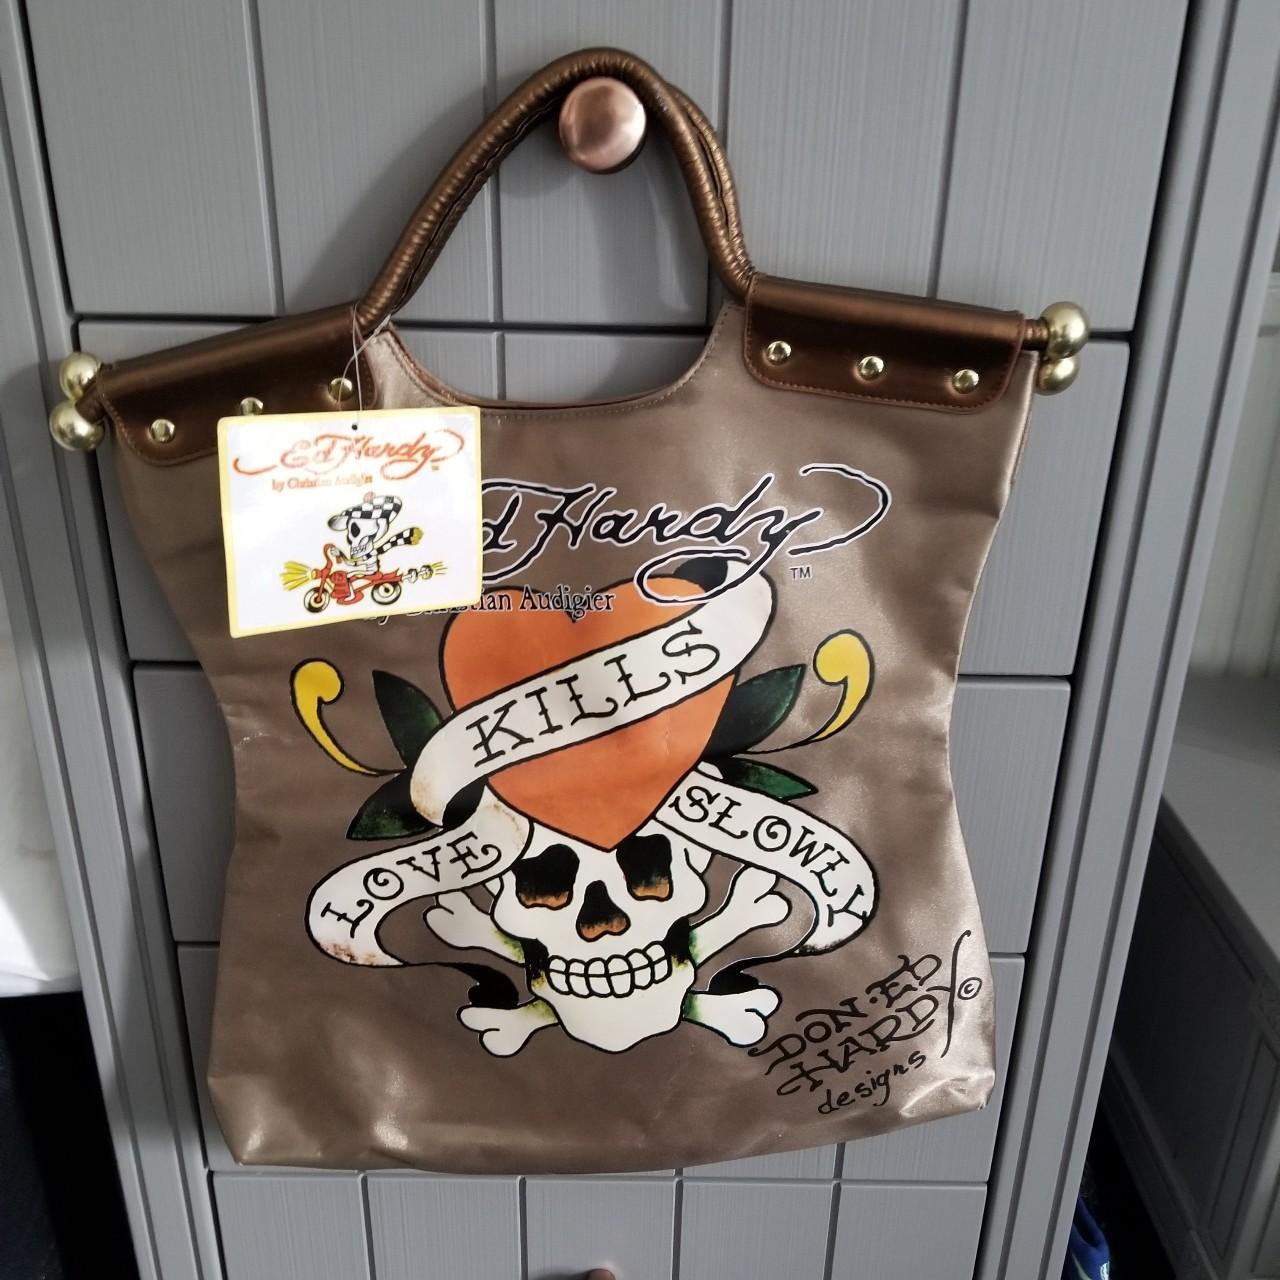 help describing/ pricing these ed hardy pants + this bag : r/Depop